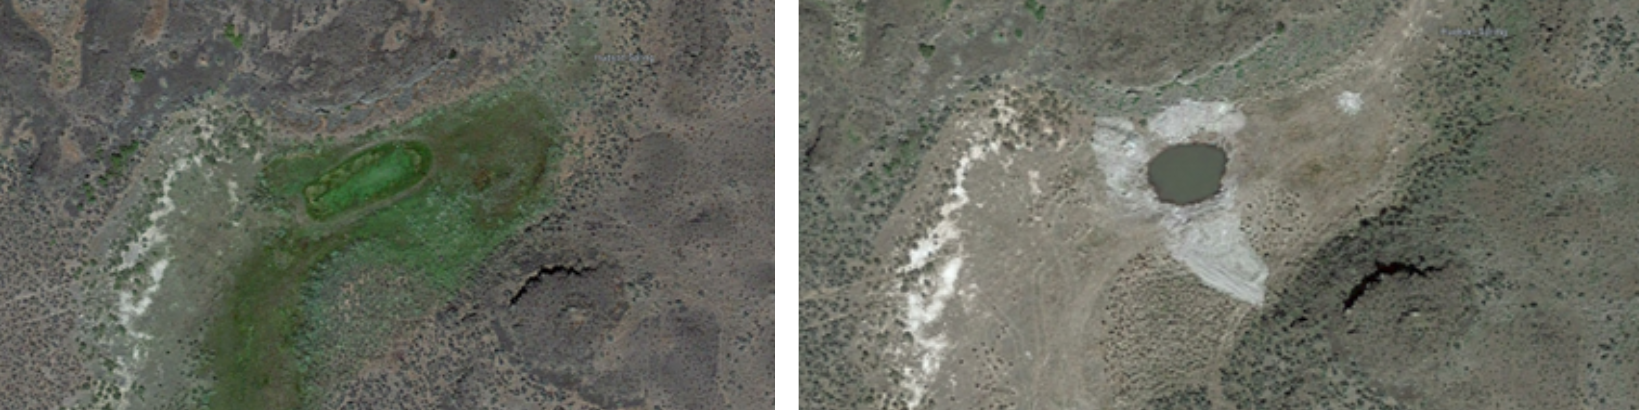 Aerial photos of a green wetlands surrounded by brown earth and an aerial photo of water surrounded by white and brown earth.